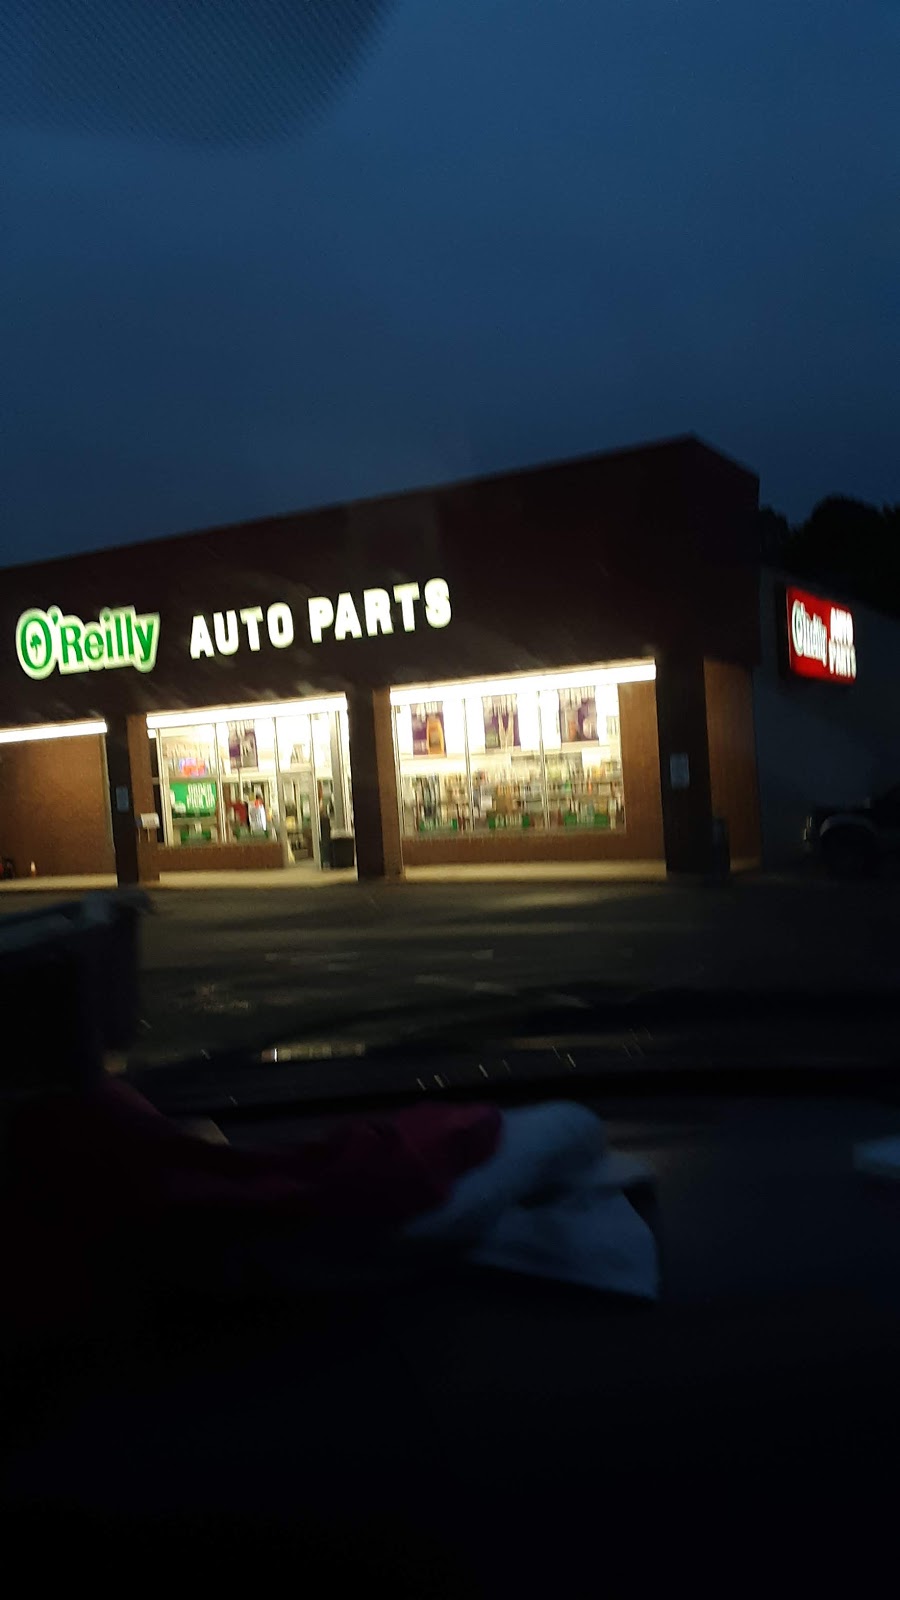 OReilly Auto Parts | 1345 Pinewood Rd, Rock Hill, SC 29730, USA | Phone: (803) 324-2911